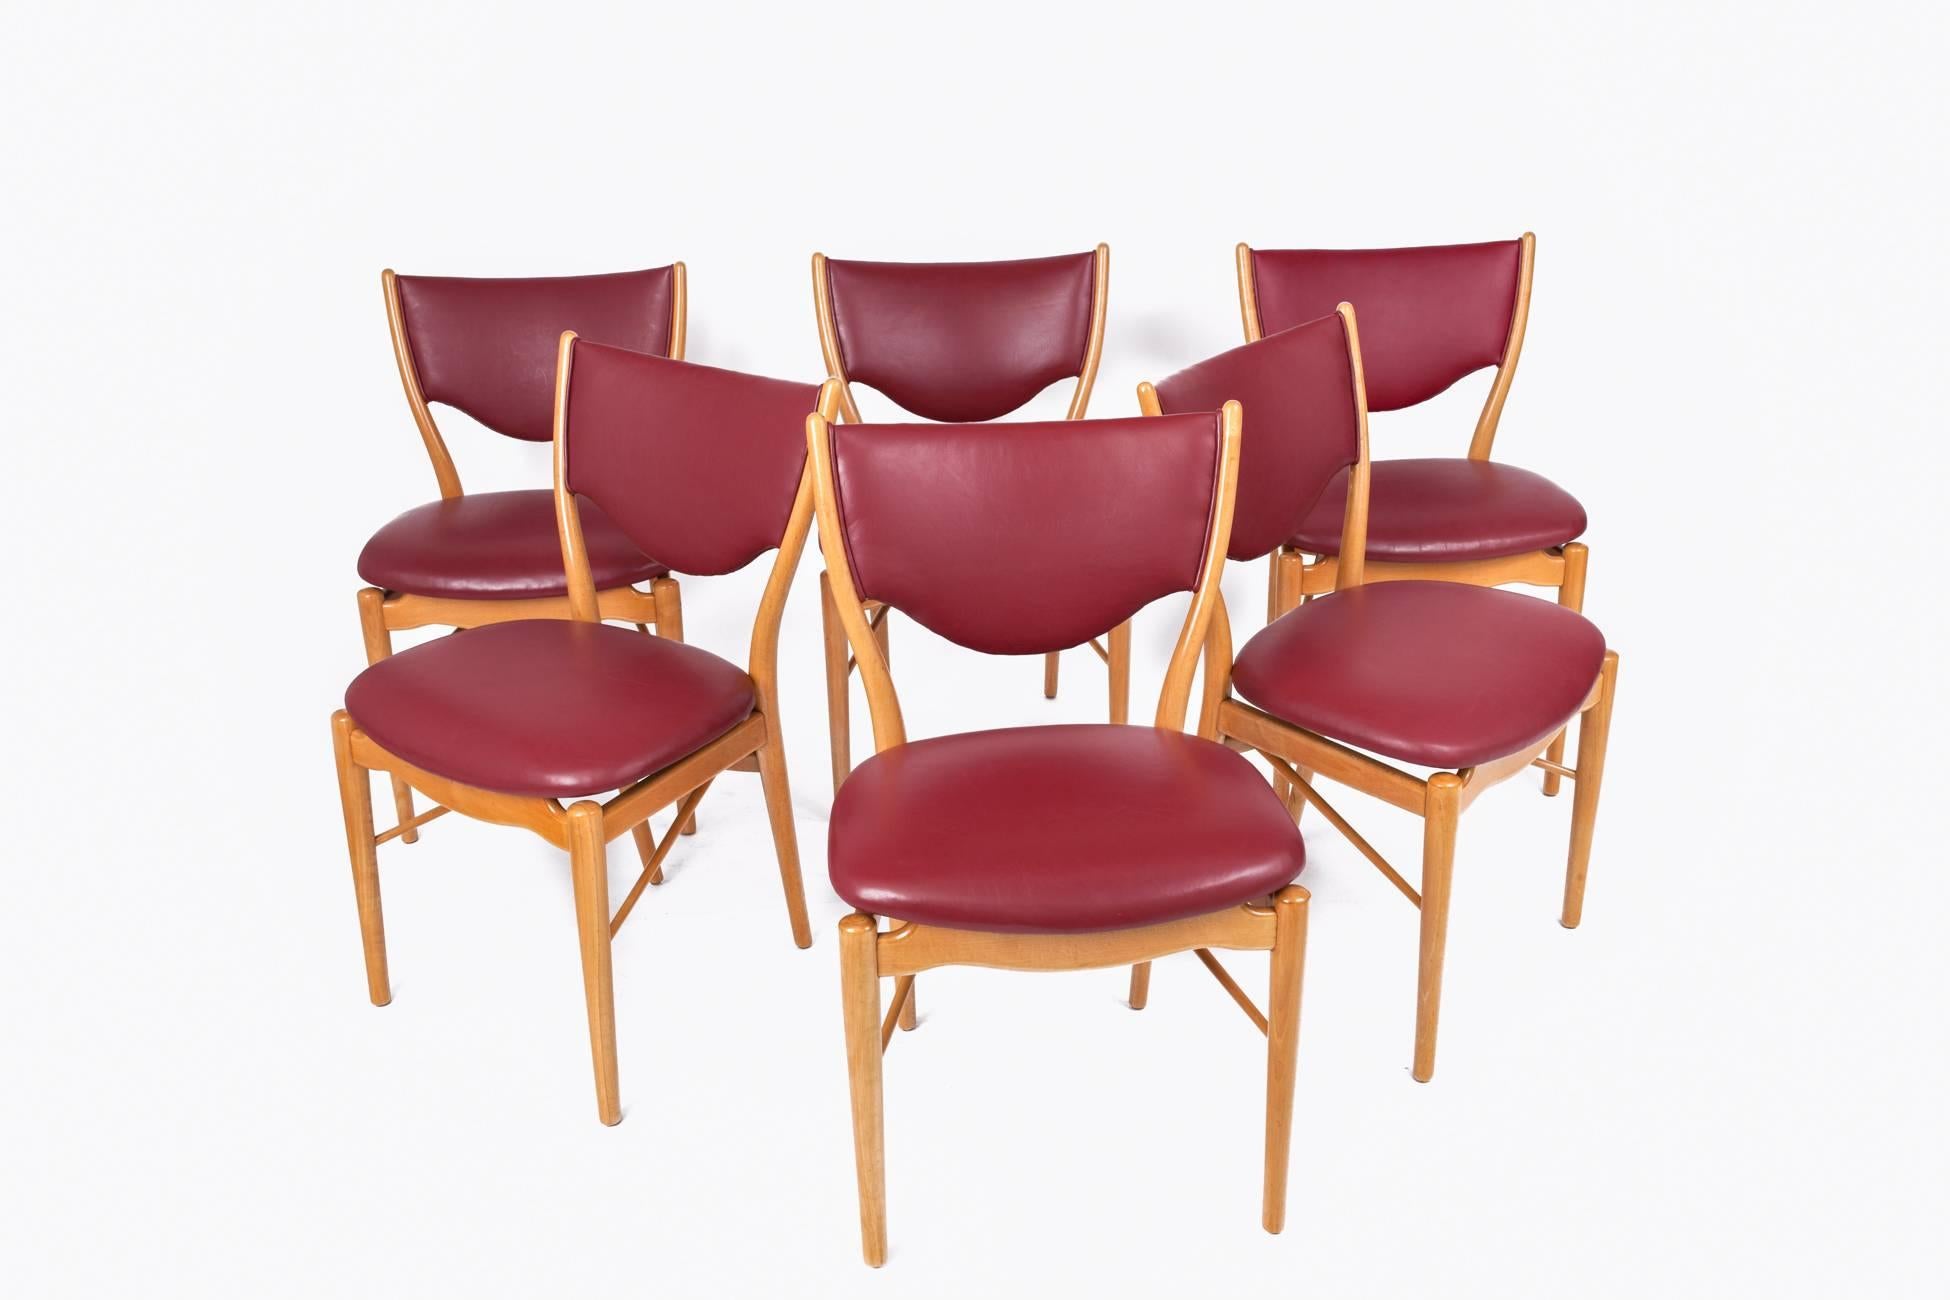 Finn Juhl (1912 – 1989)

Graceful set of six sinuous BO-63 dining chairs by Finn Juhl for Bovirke, in beech wood with a light gloss finish, with gently curved backs that follow the human form and seats upholstered in burgundy leather. The wave of